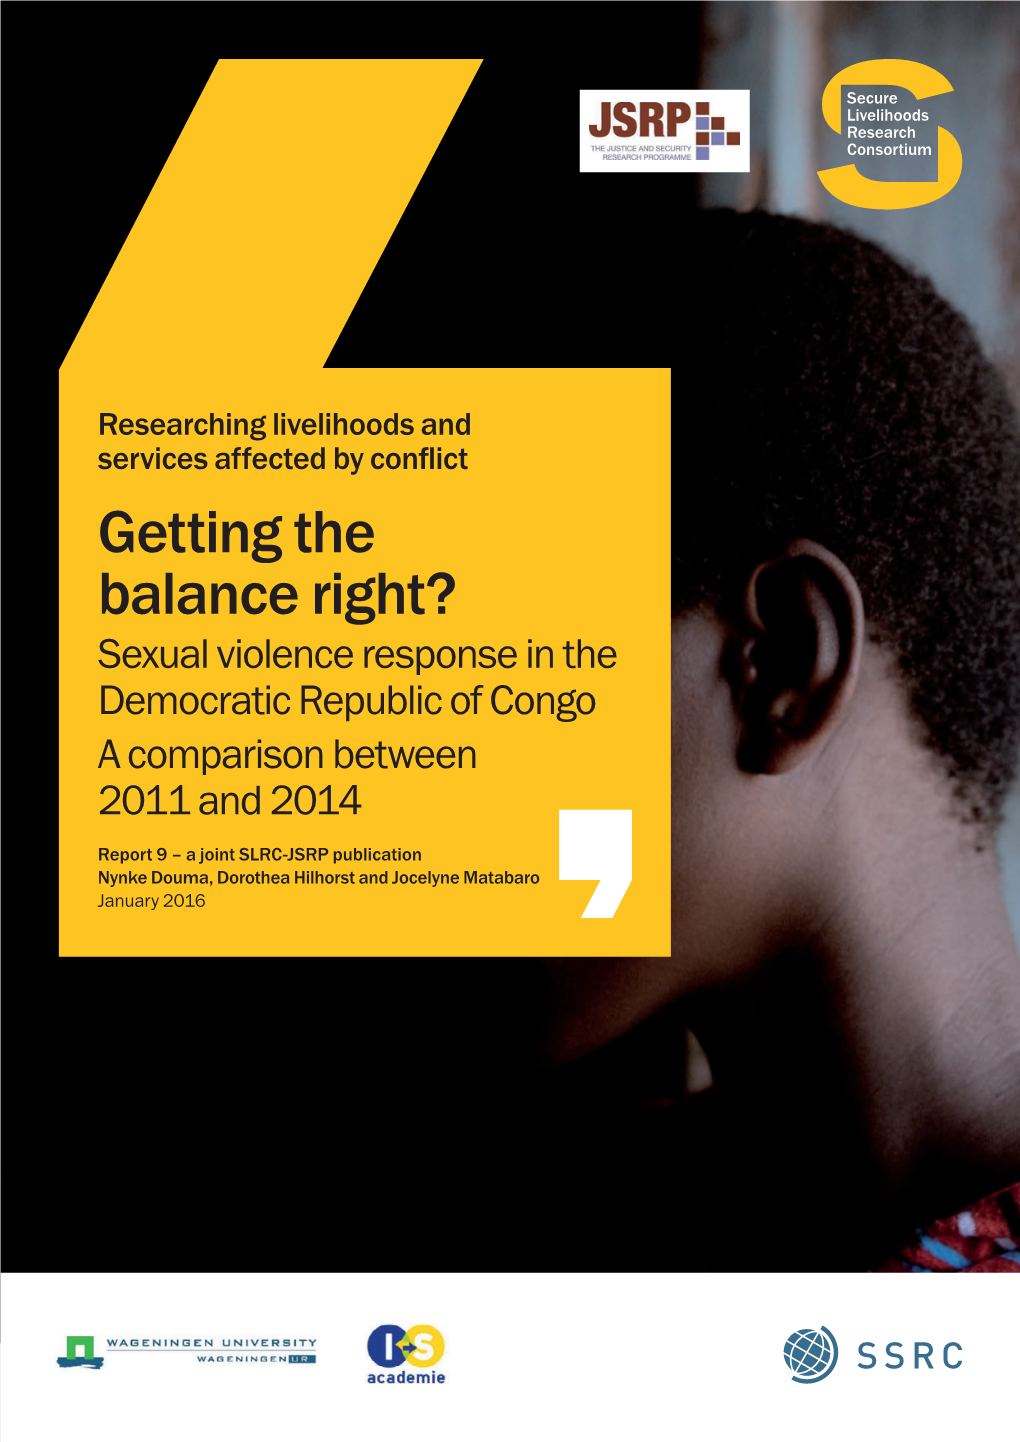 Getting the Balance Right? Sexual Violence Response in the Democratic Republic of Congo a Comparison Between 2011 and 2014